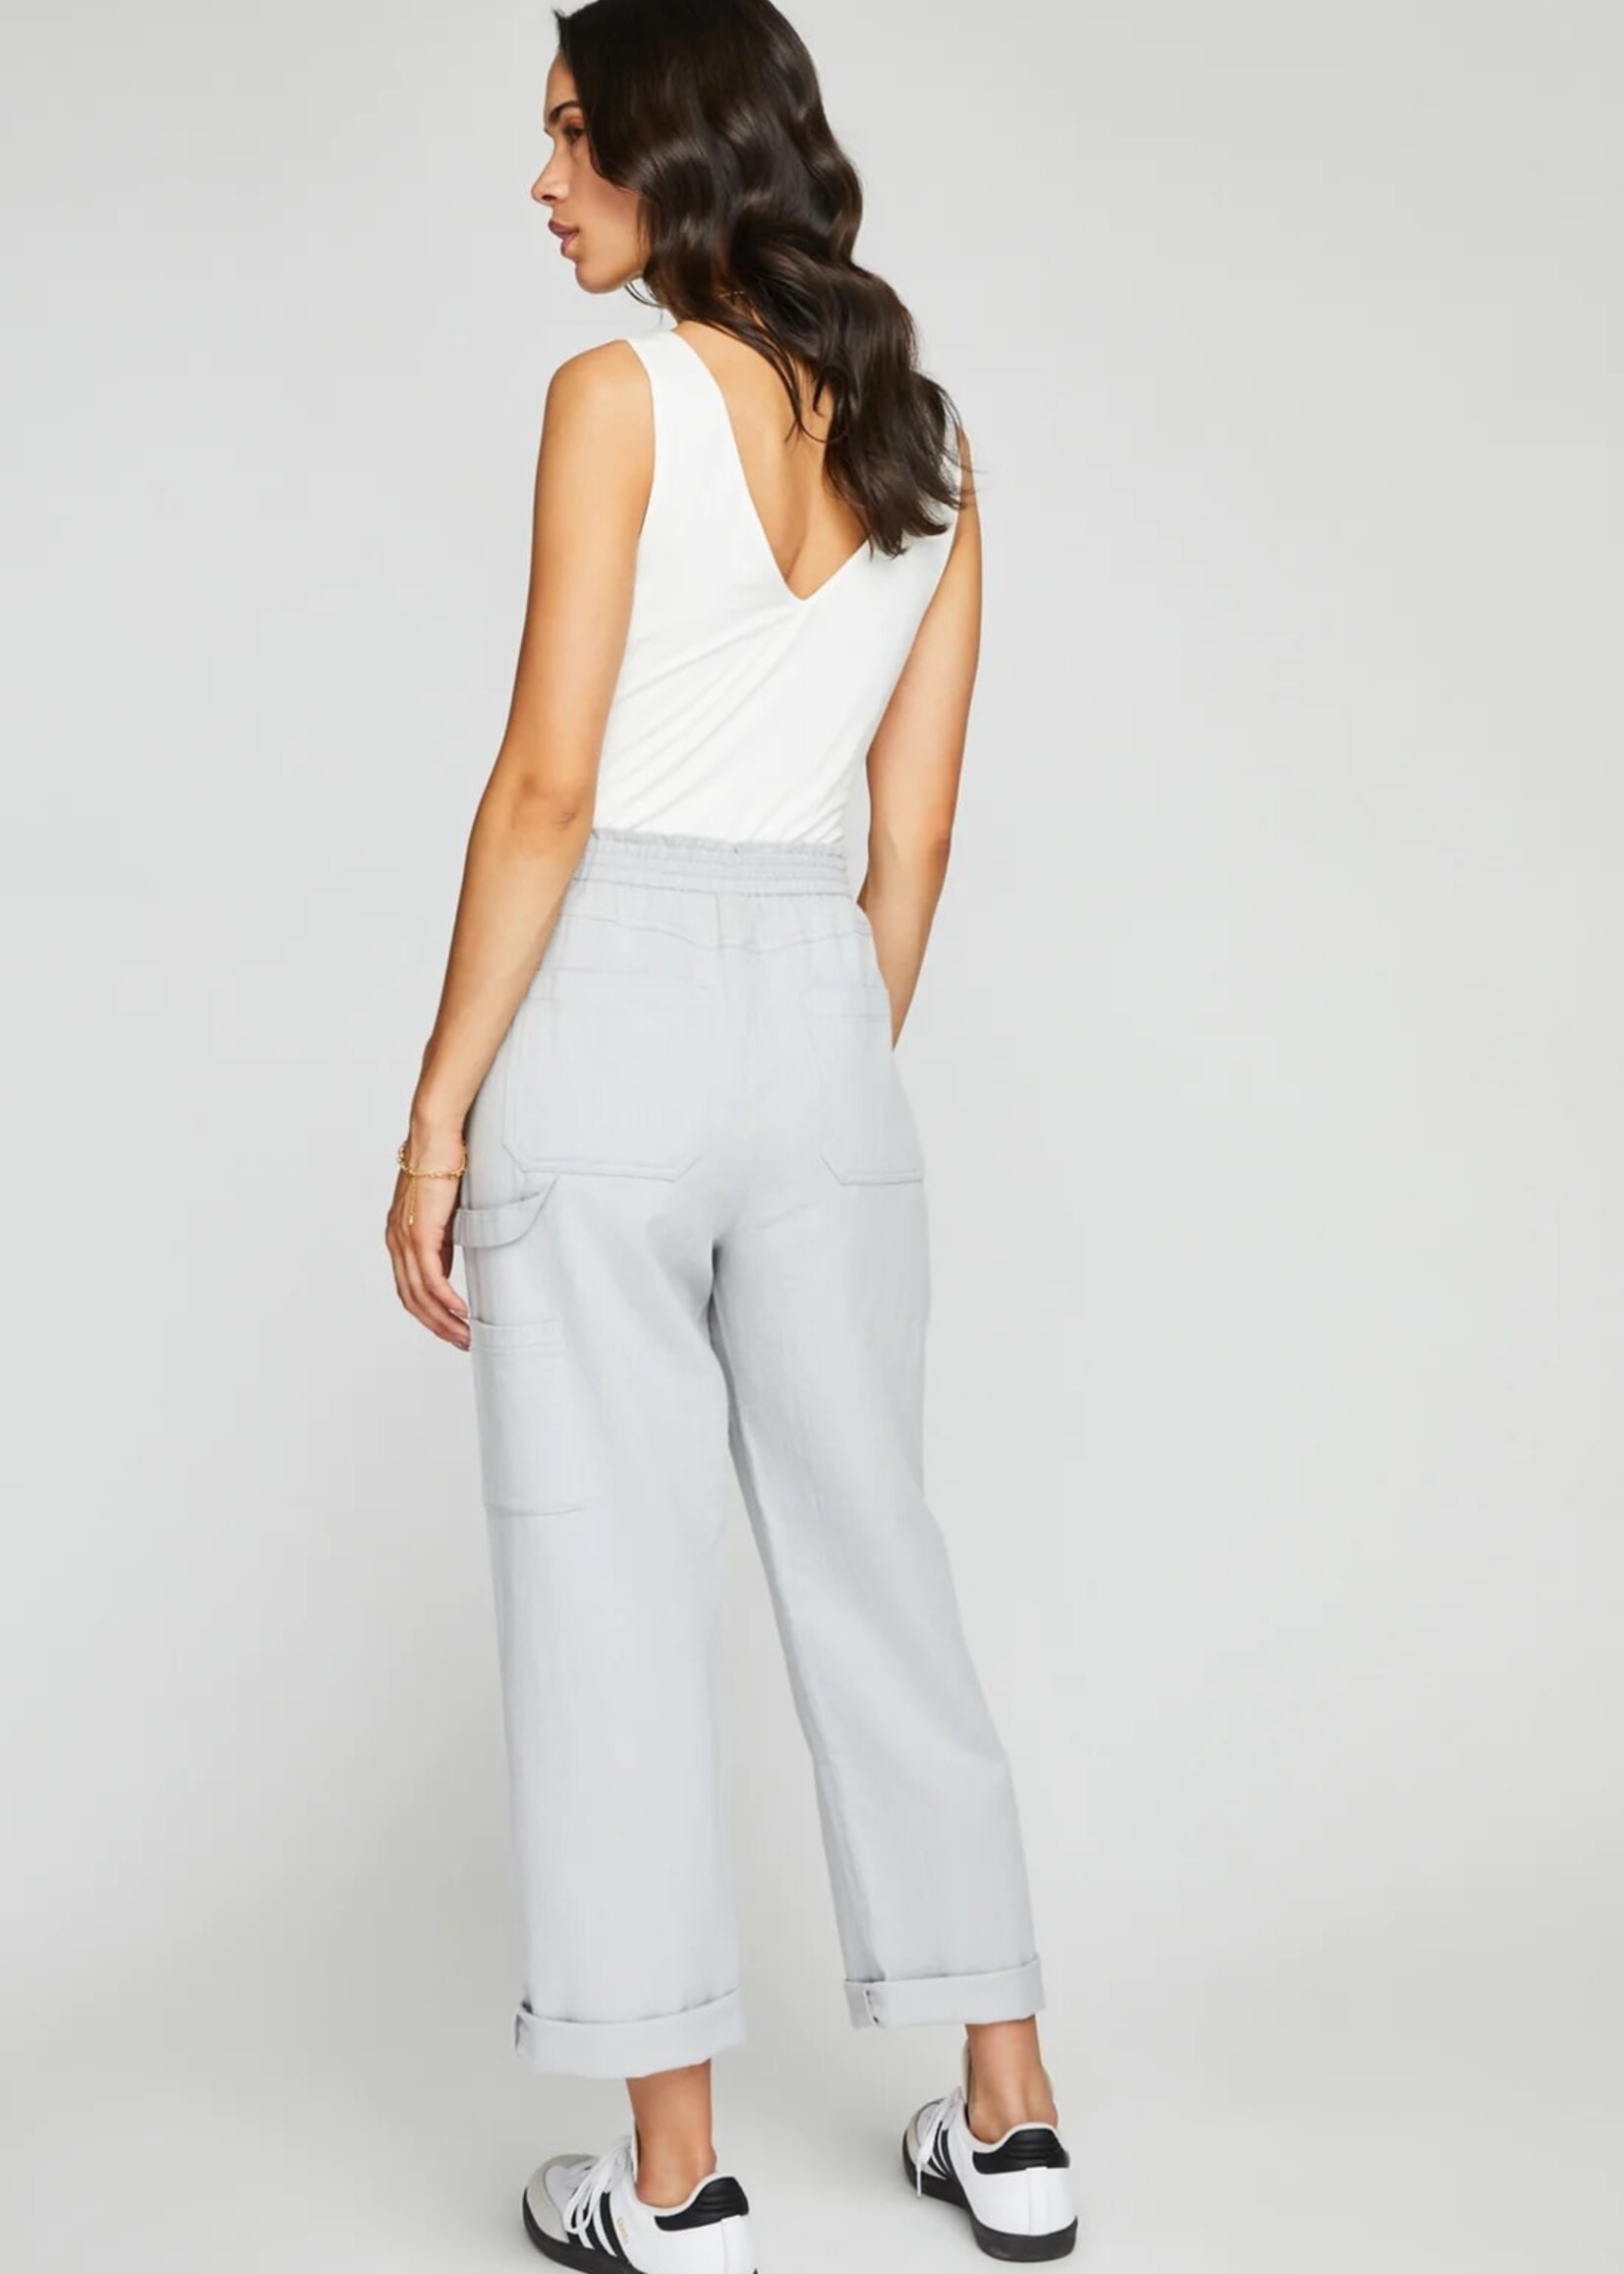 Gentle Fawn Gilmore Pant